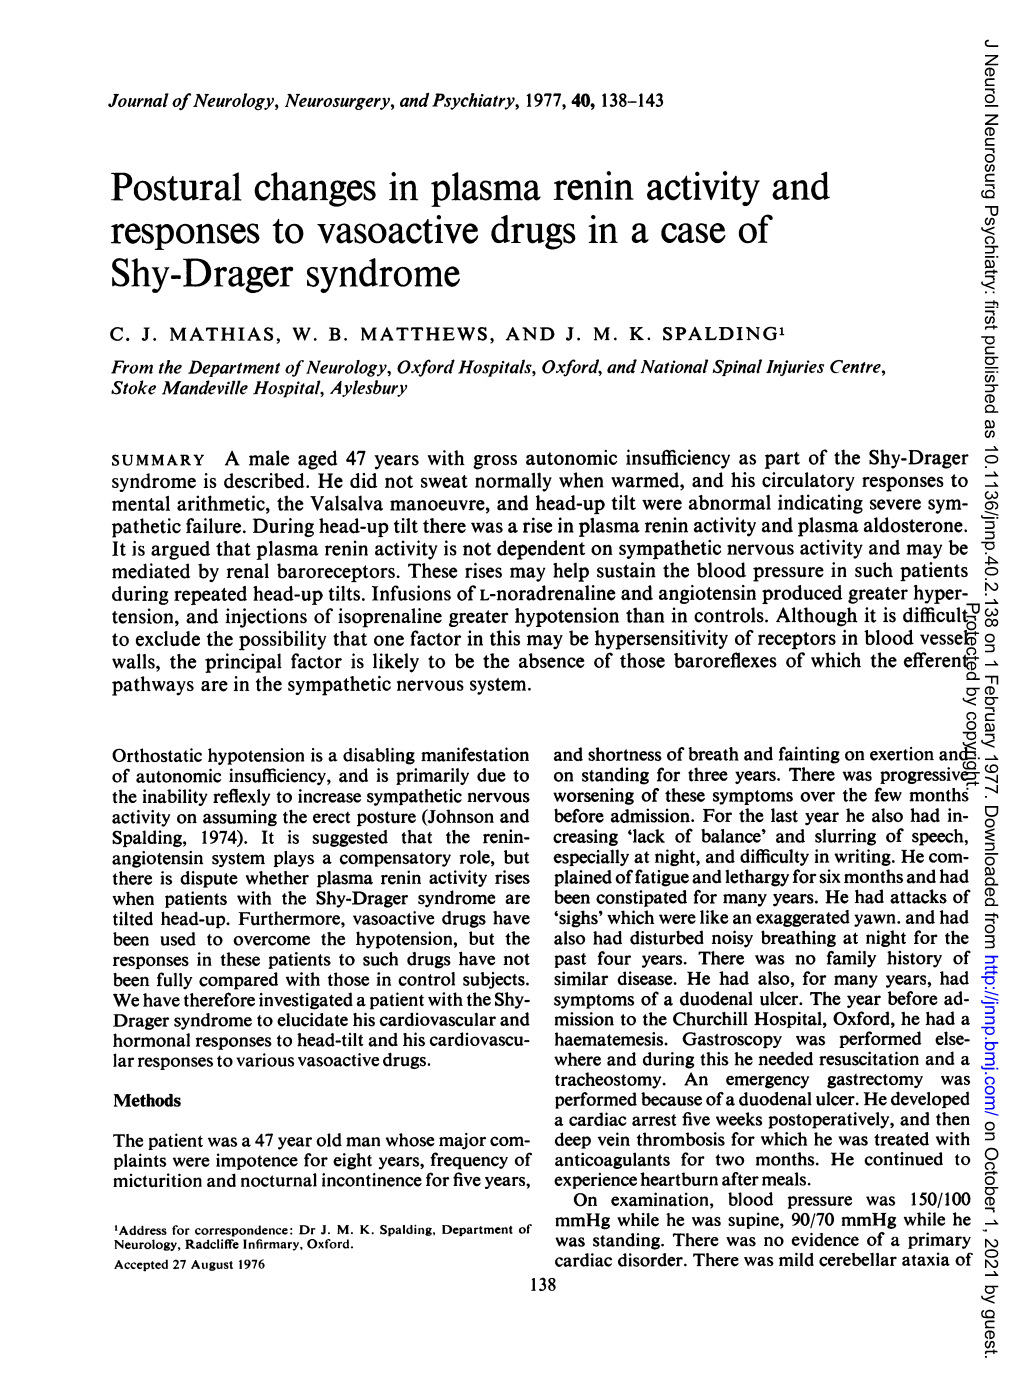 Postural Changes in Plasma Renin Activity and Responses to Vasoactive Drugs in a Case of Shy-Drager Syndrome